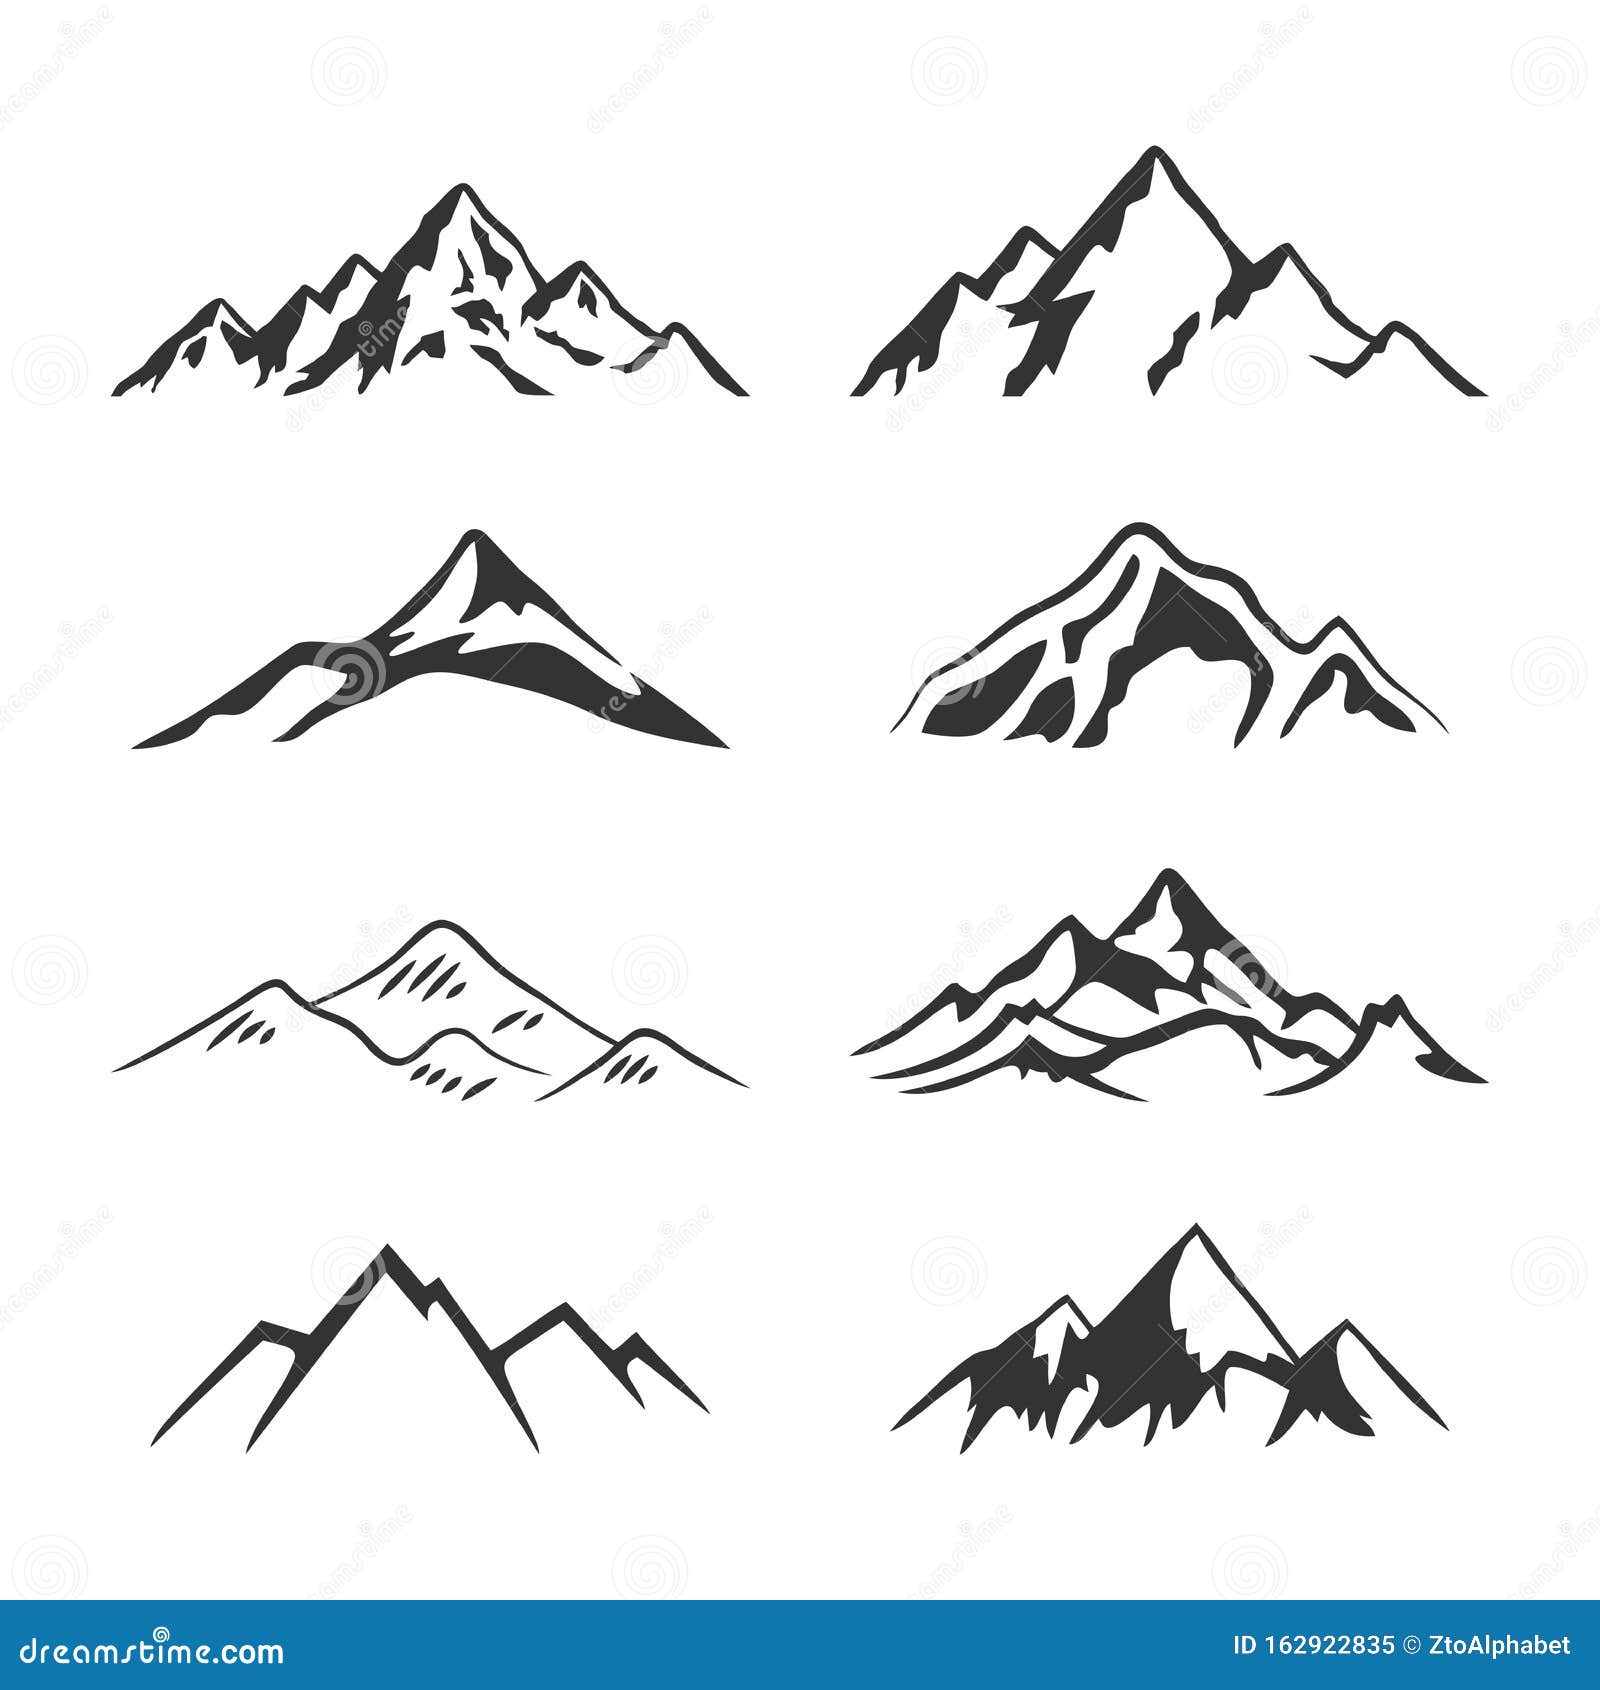 mountain silhouette clipart collection set